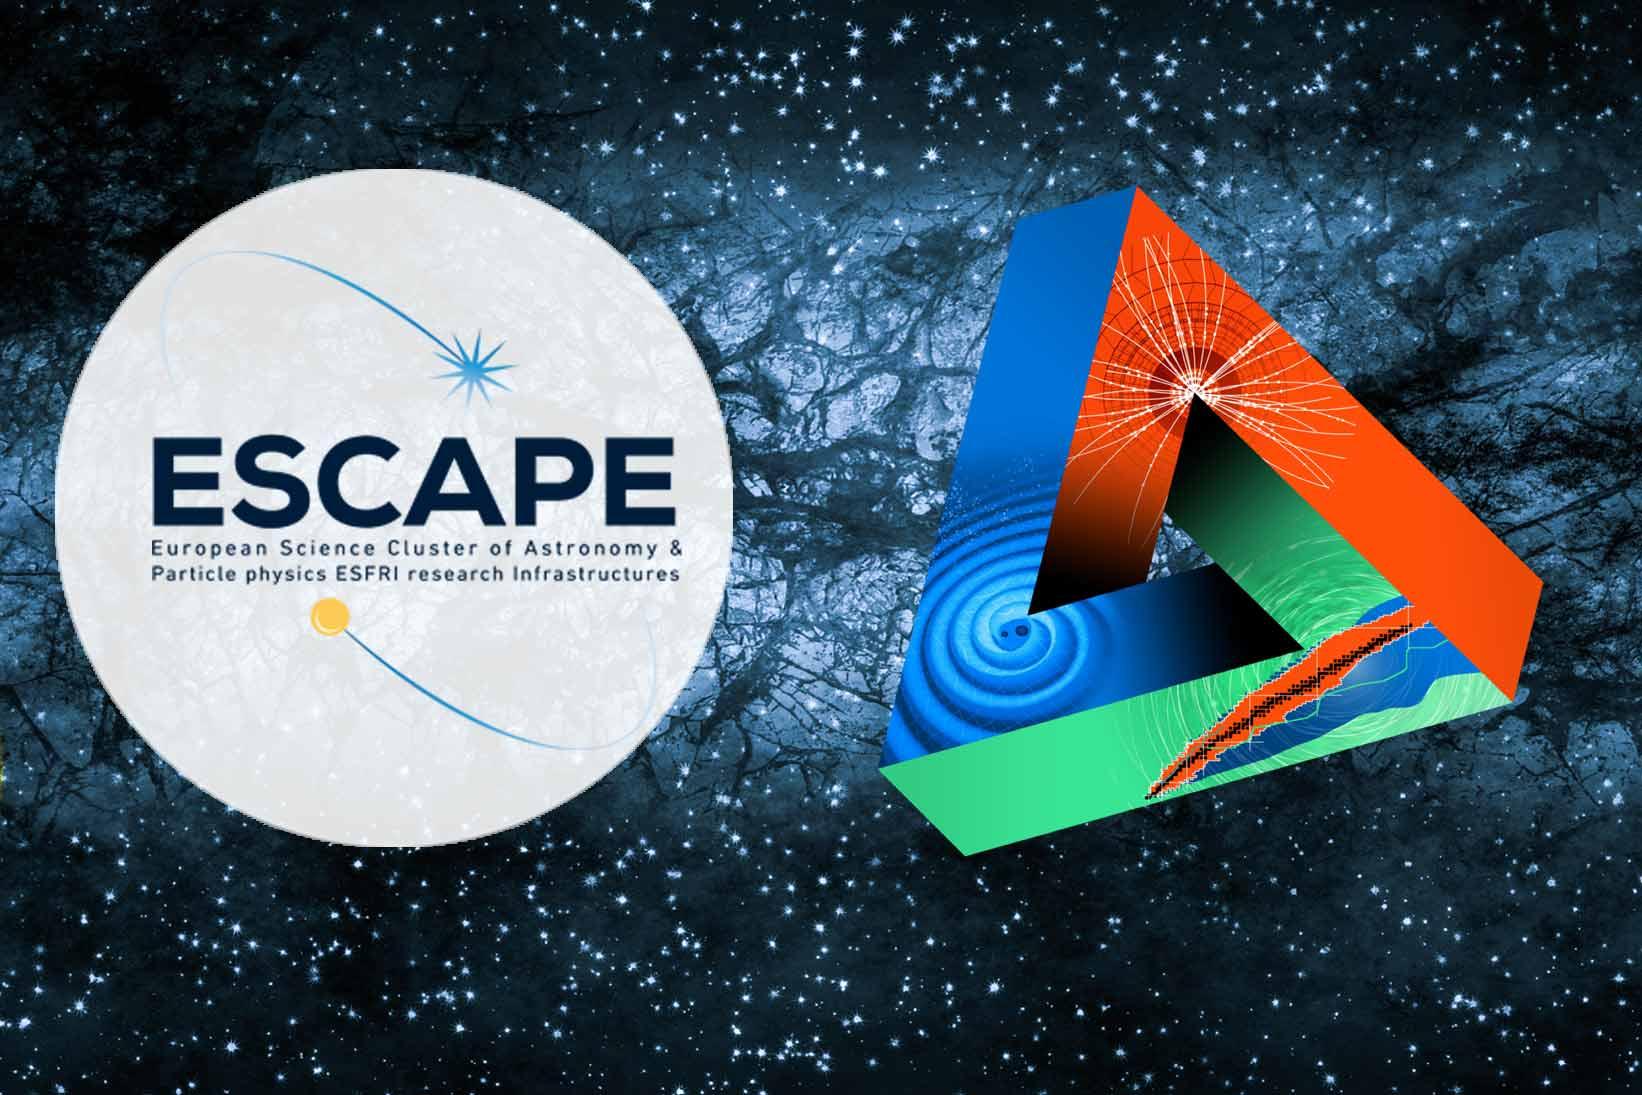 ESCAPE engages in the initiative for dark matter spanning ECFA, NuPECC and APPEC